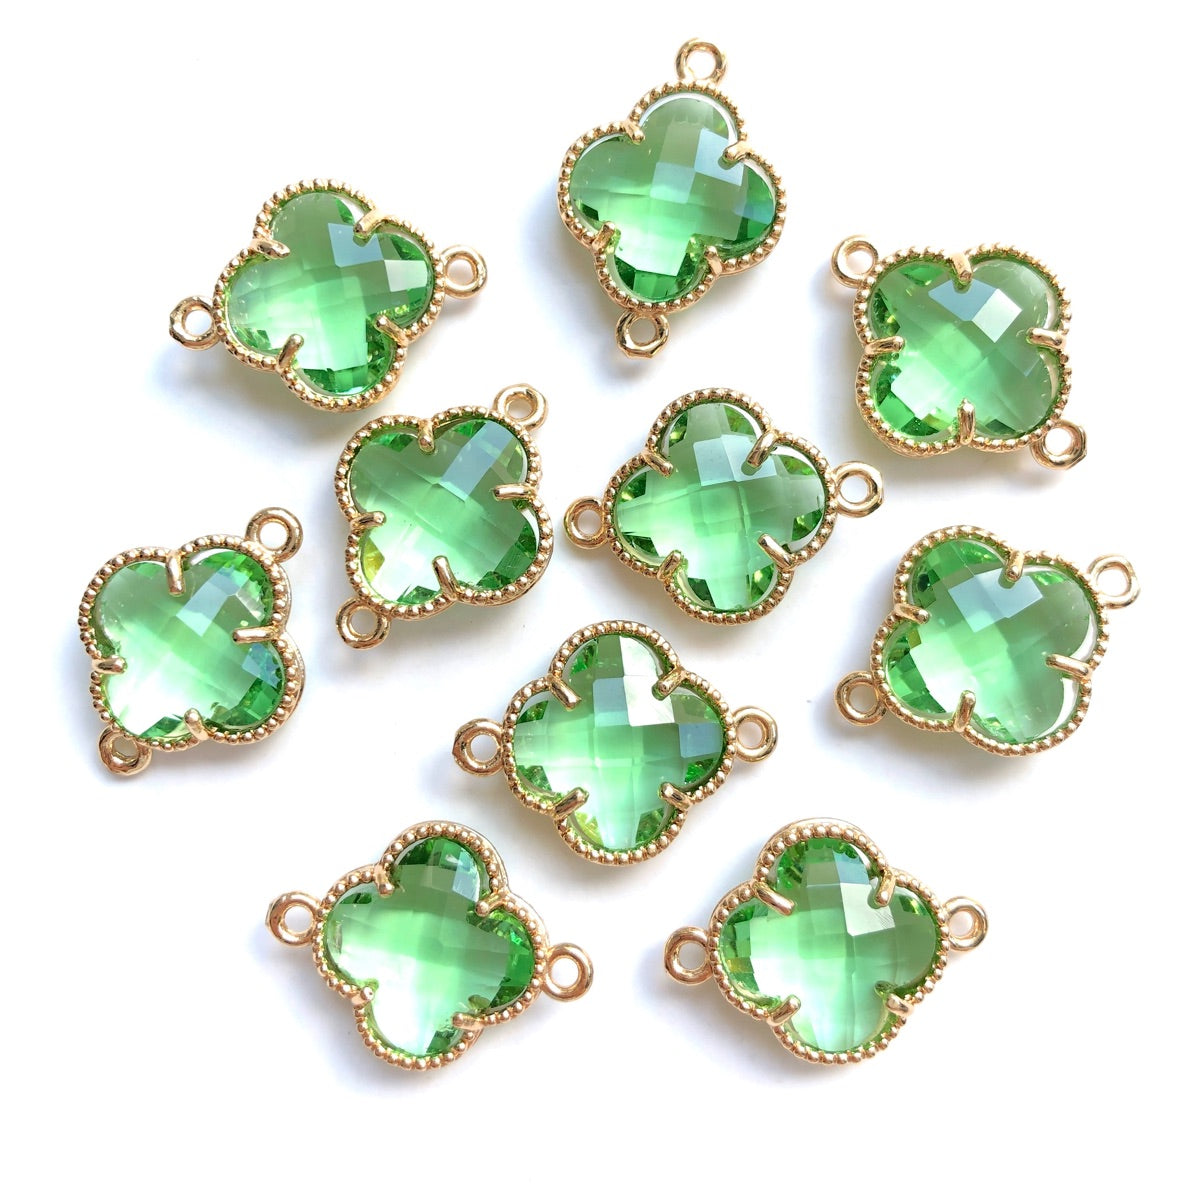 10pcs/Lot Gold Plated Glass Crystal Clover Flower Connectors Light Green Stone Charms Flower Glass Beads New Charms Arrivals Charms Beads Beyond